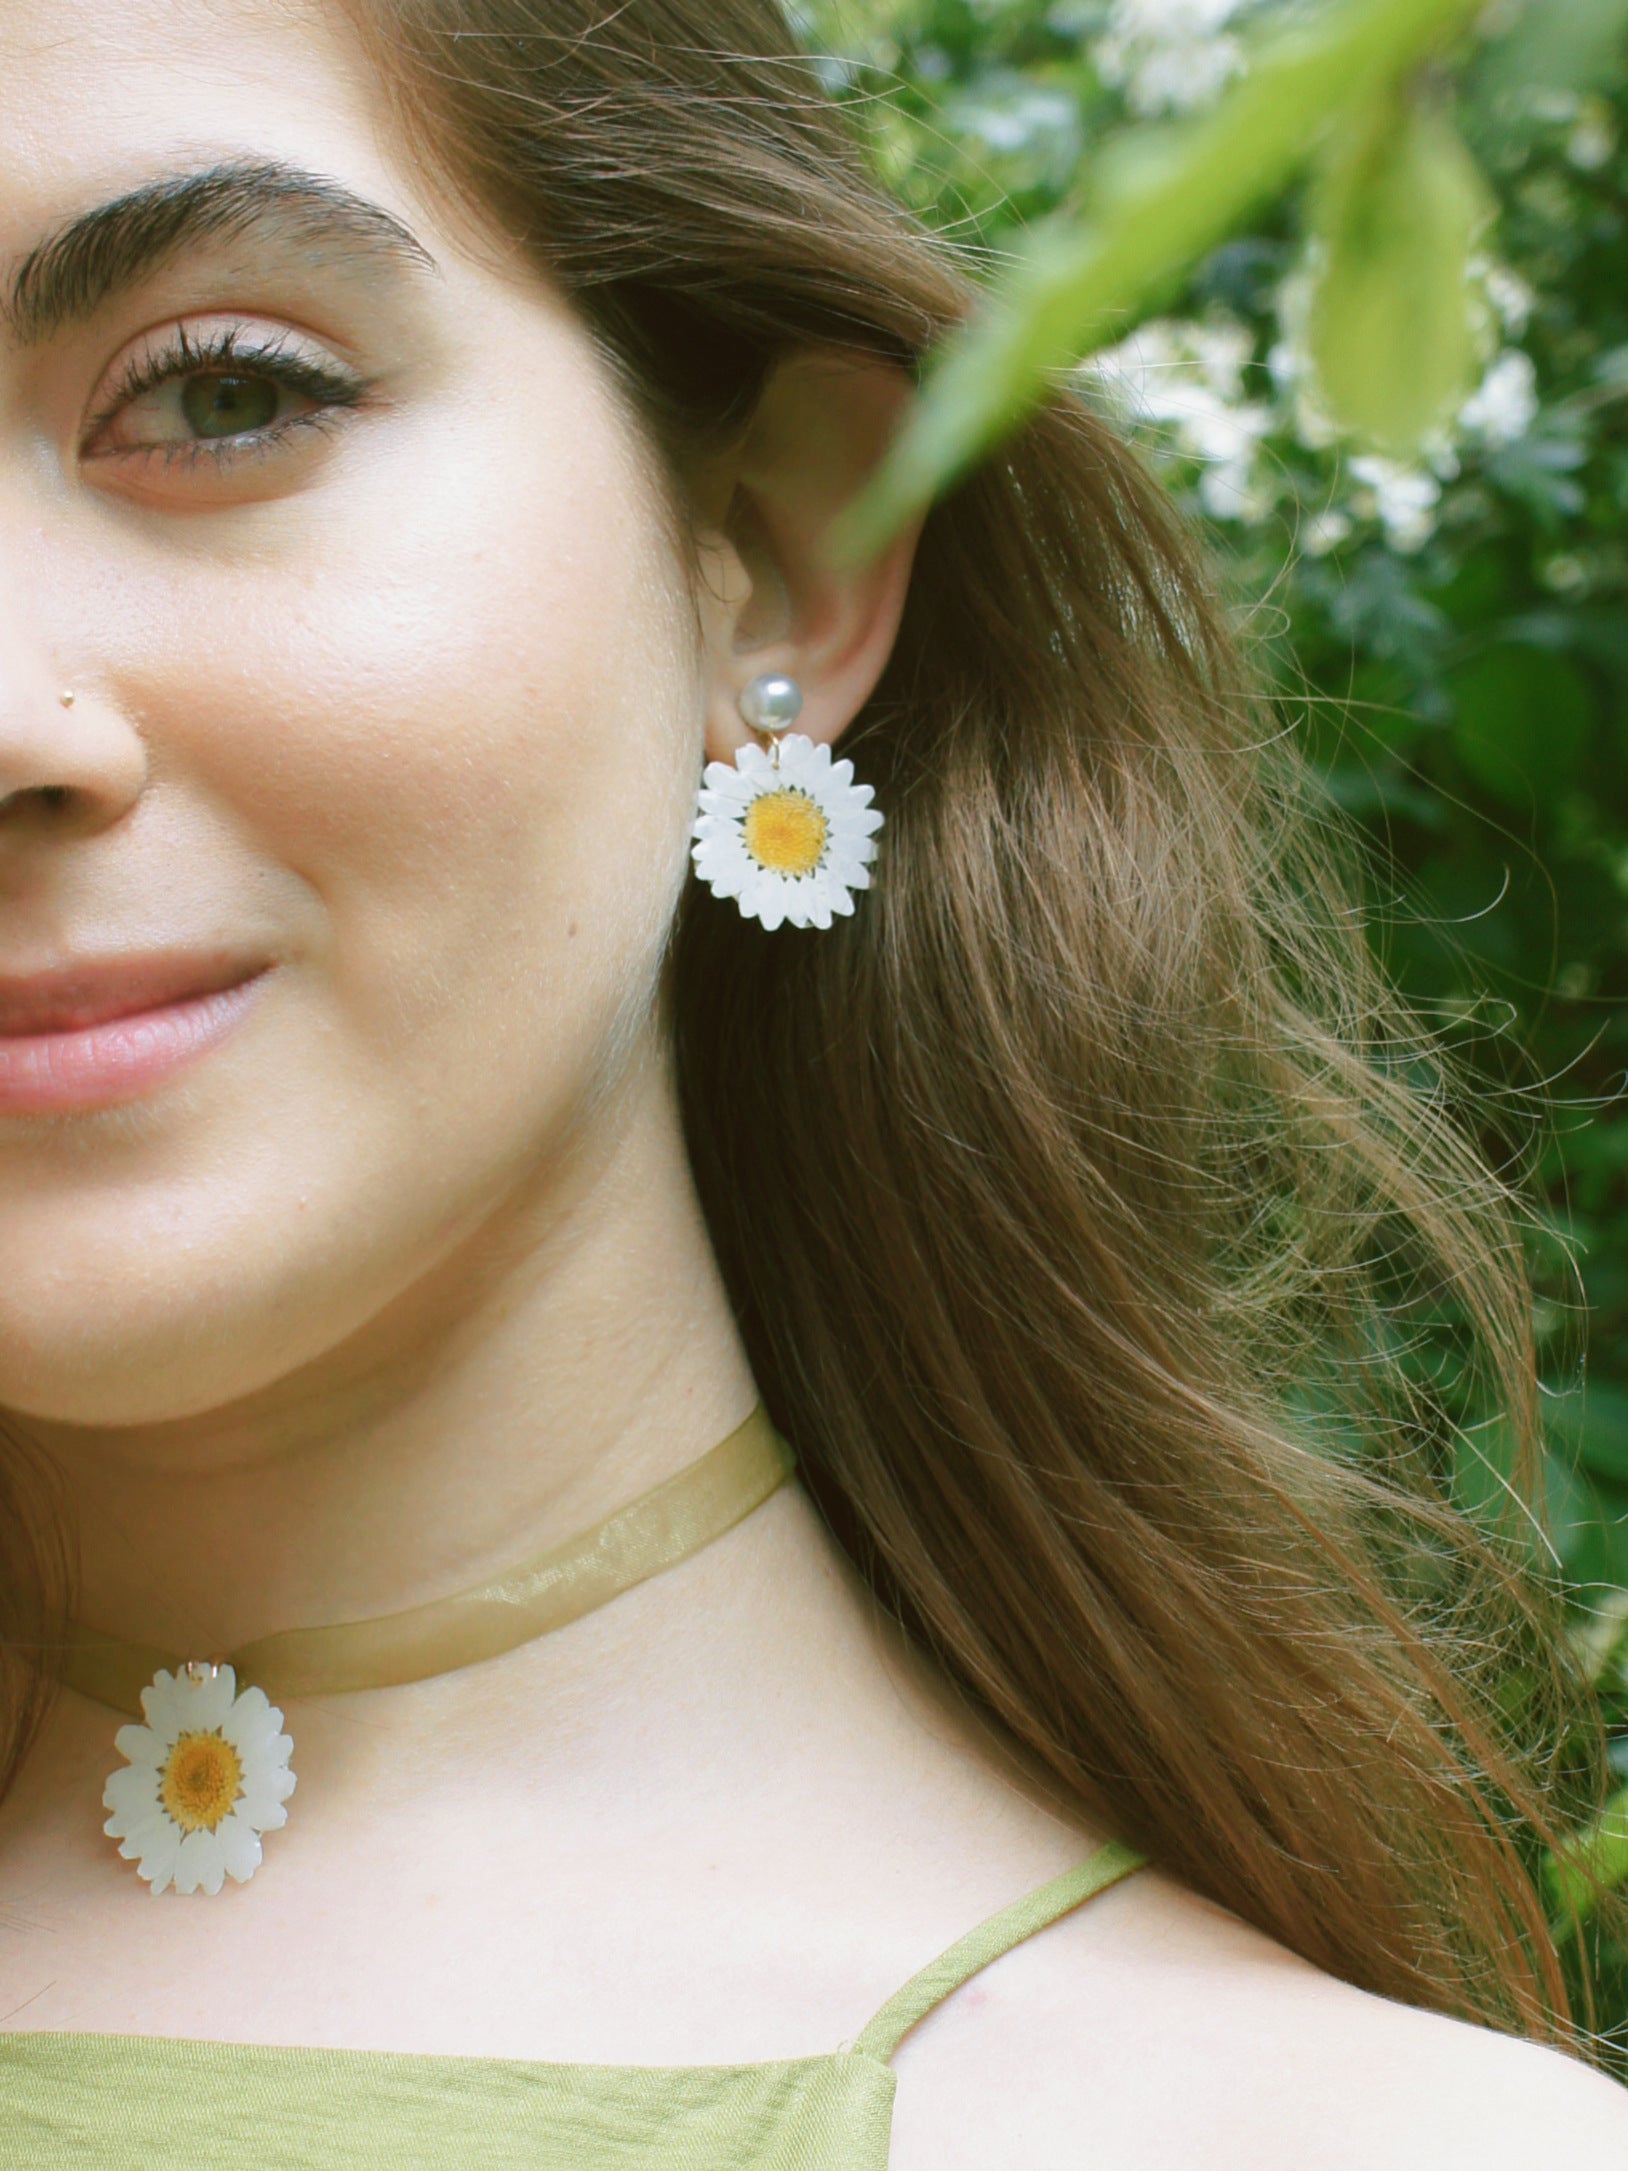 *REAL FLOWER* White Daisy Drop Earrings with Pearl Studs